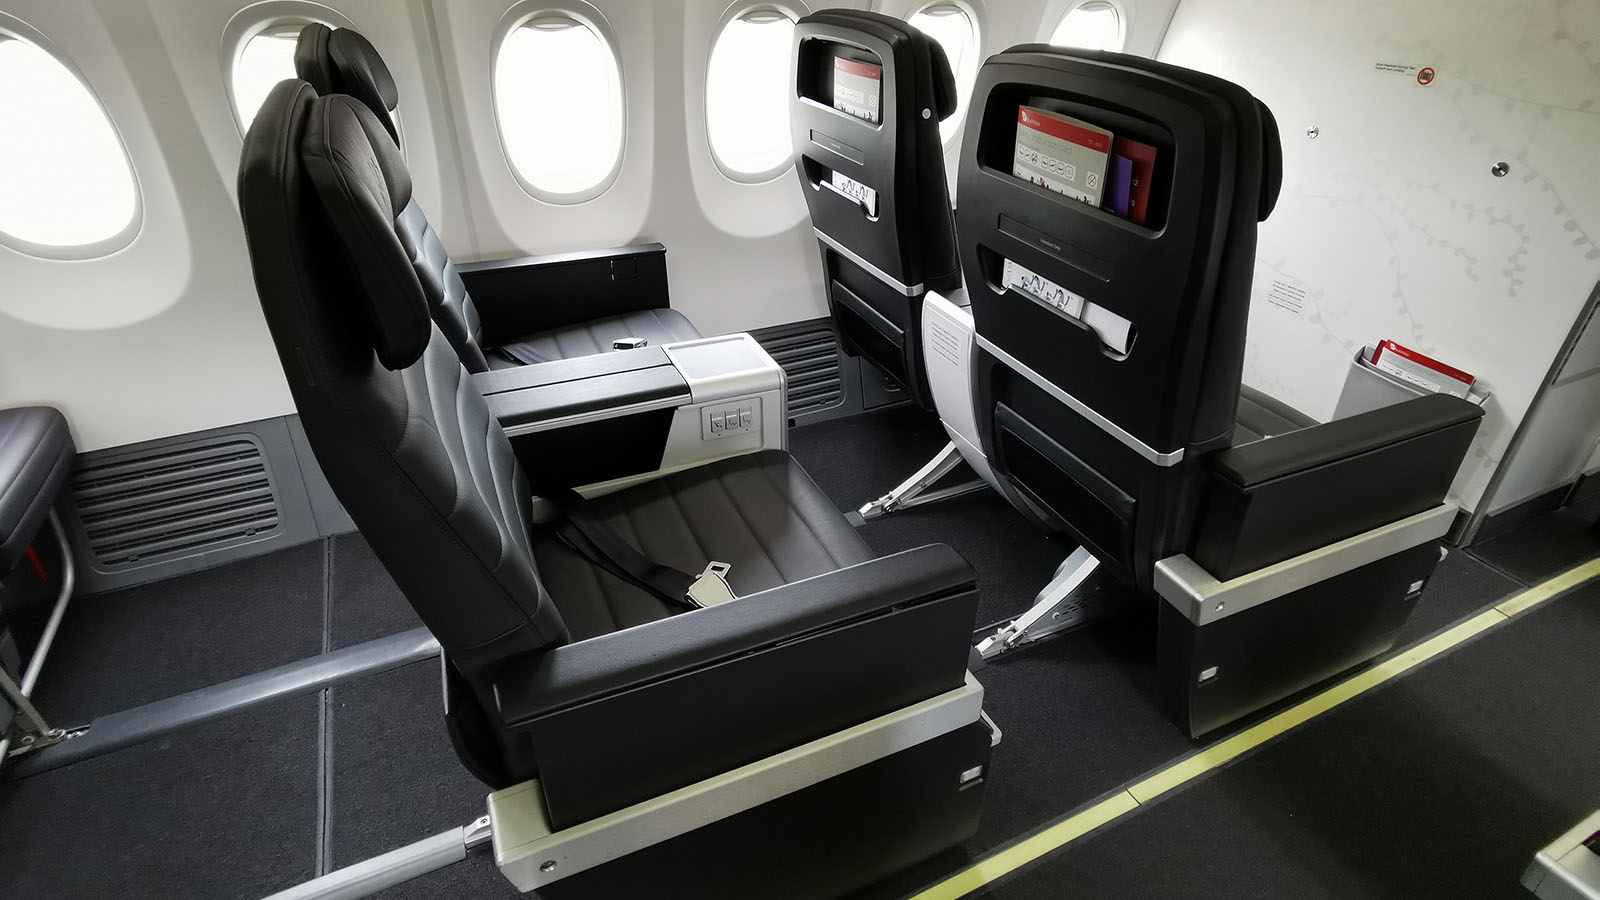 Space between Business Class and Economy on Virgin Australia's new Boeing 737